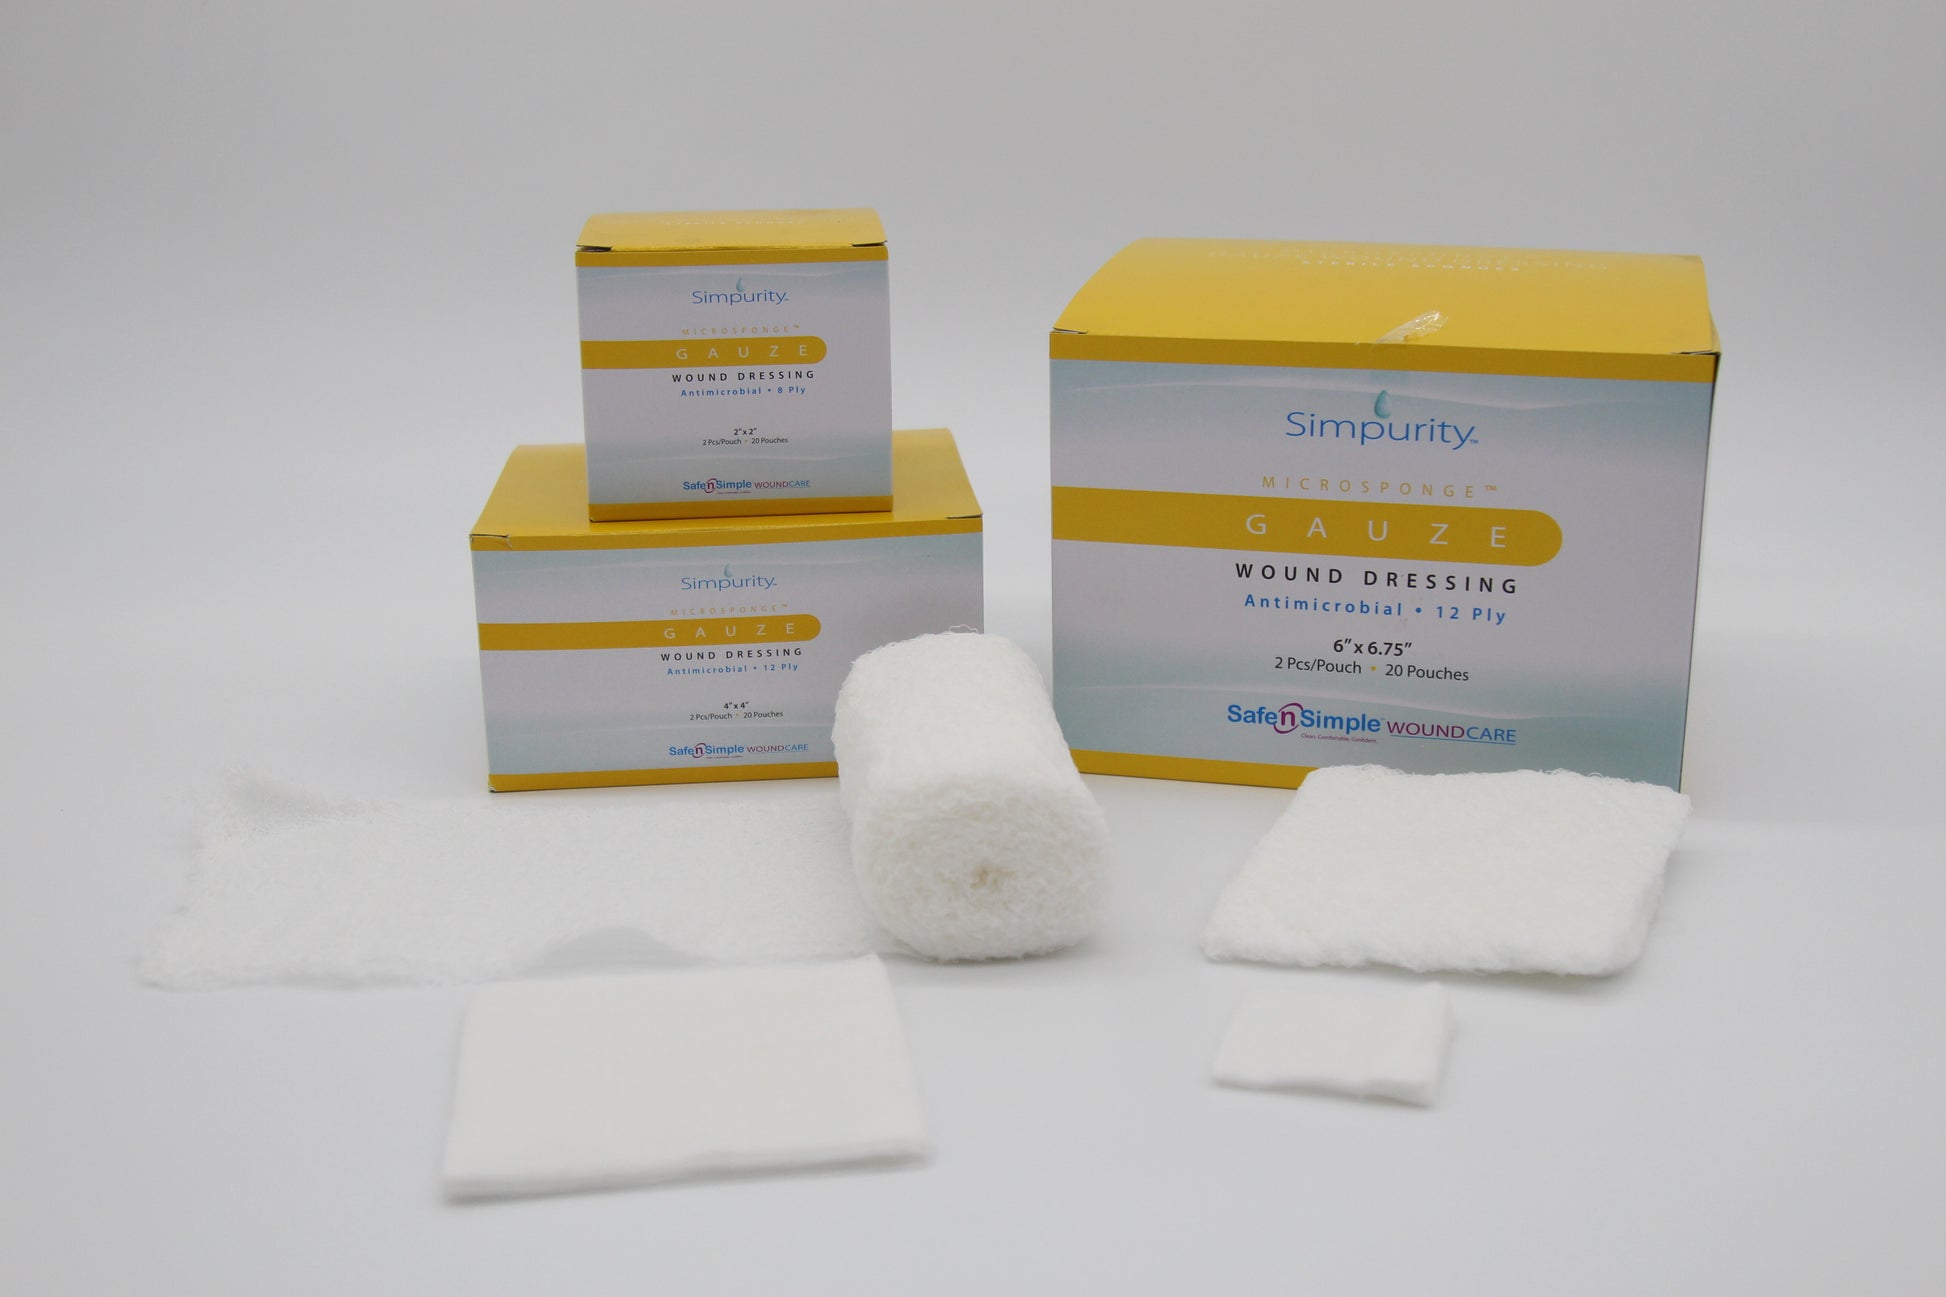 Antimicrobial Gauze |  Wound care products | Advanced Wound Care | SNS medical | Safe n Simple